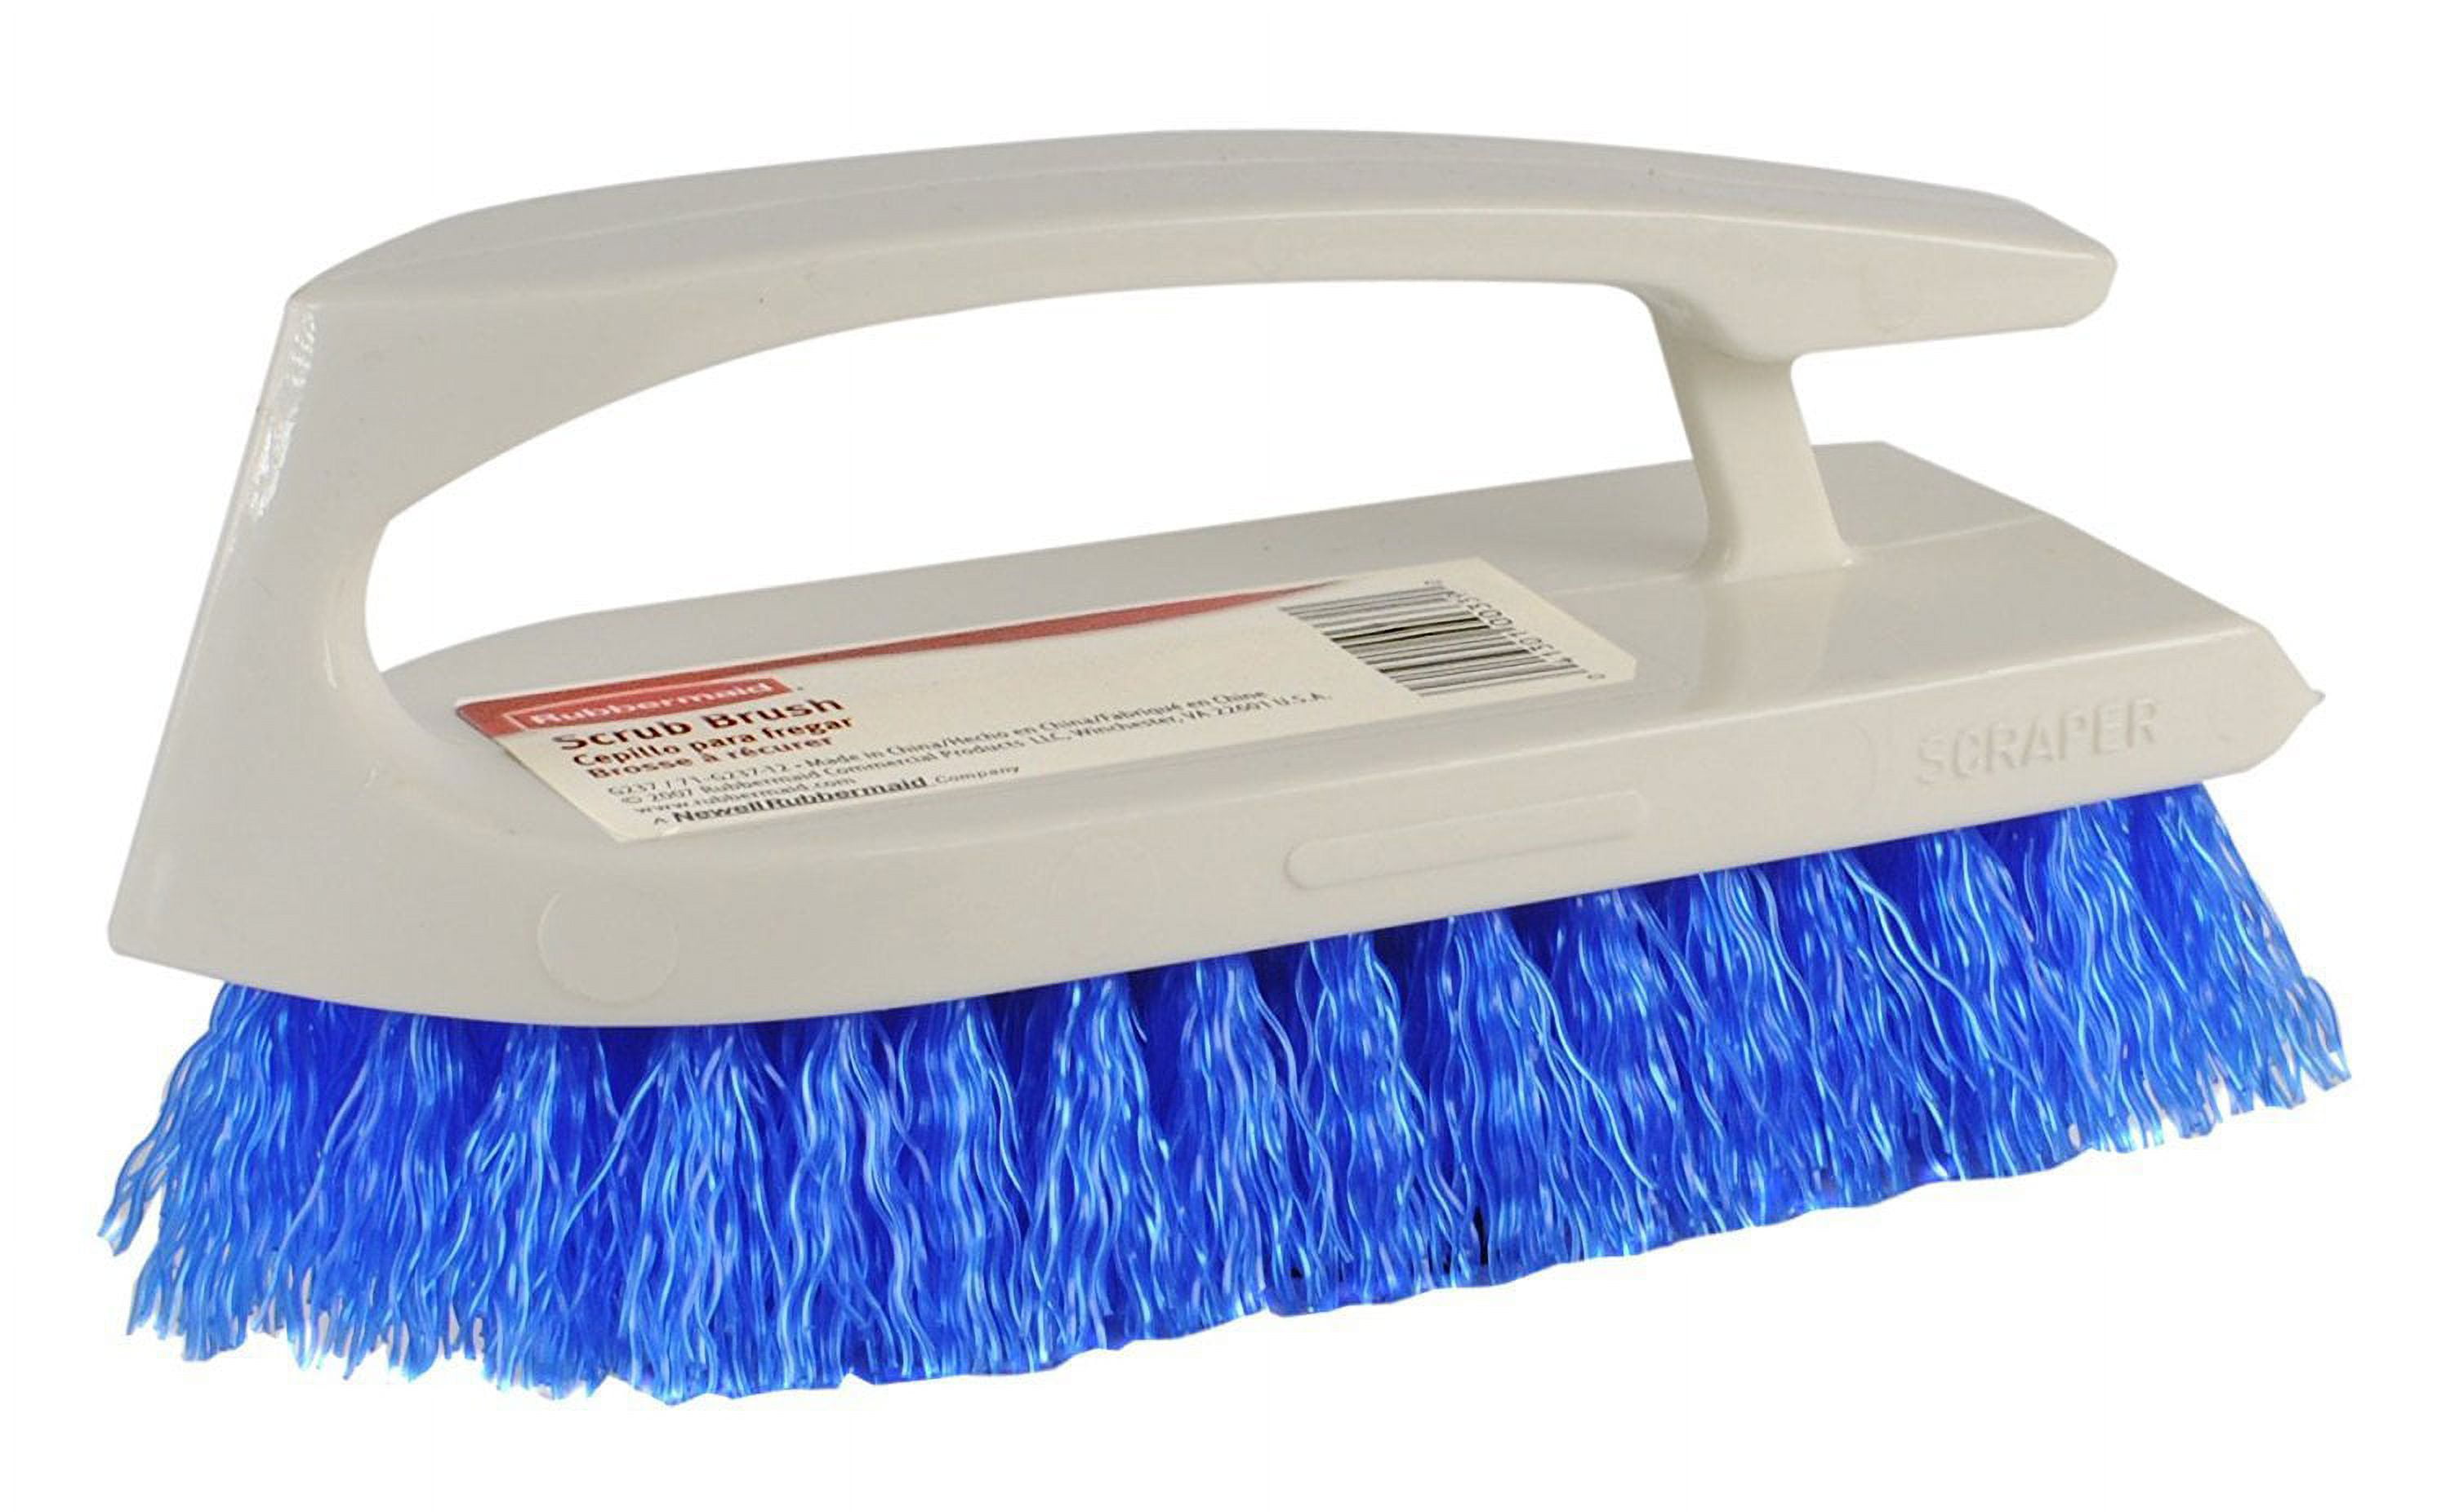 RUBBERMAID SCRUB BRUSH SHARKNOSE PROFESSIONAL PLUS LOT OF 2***